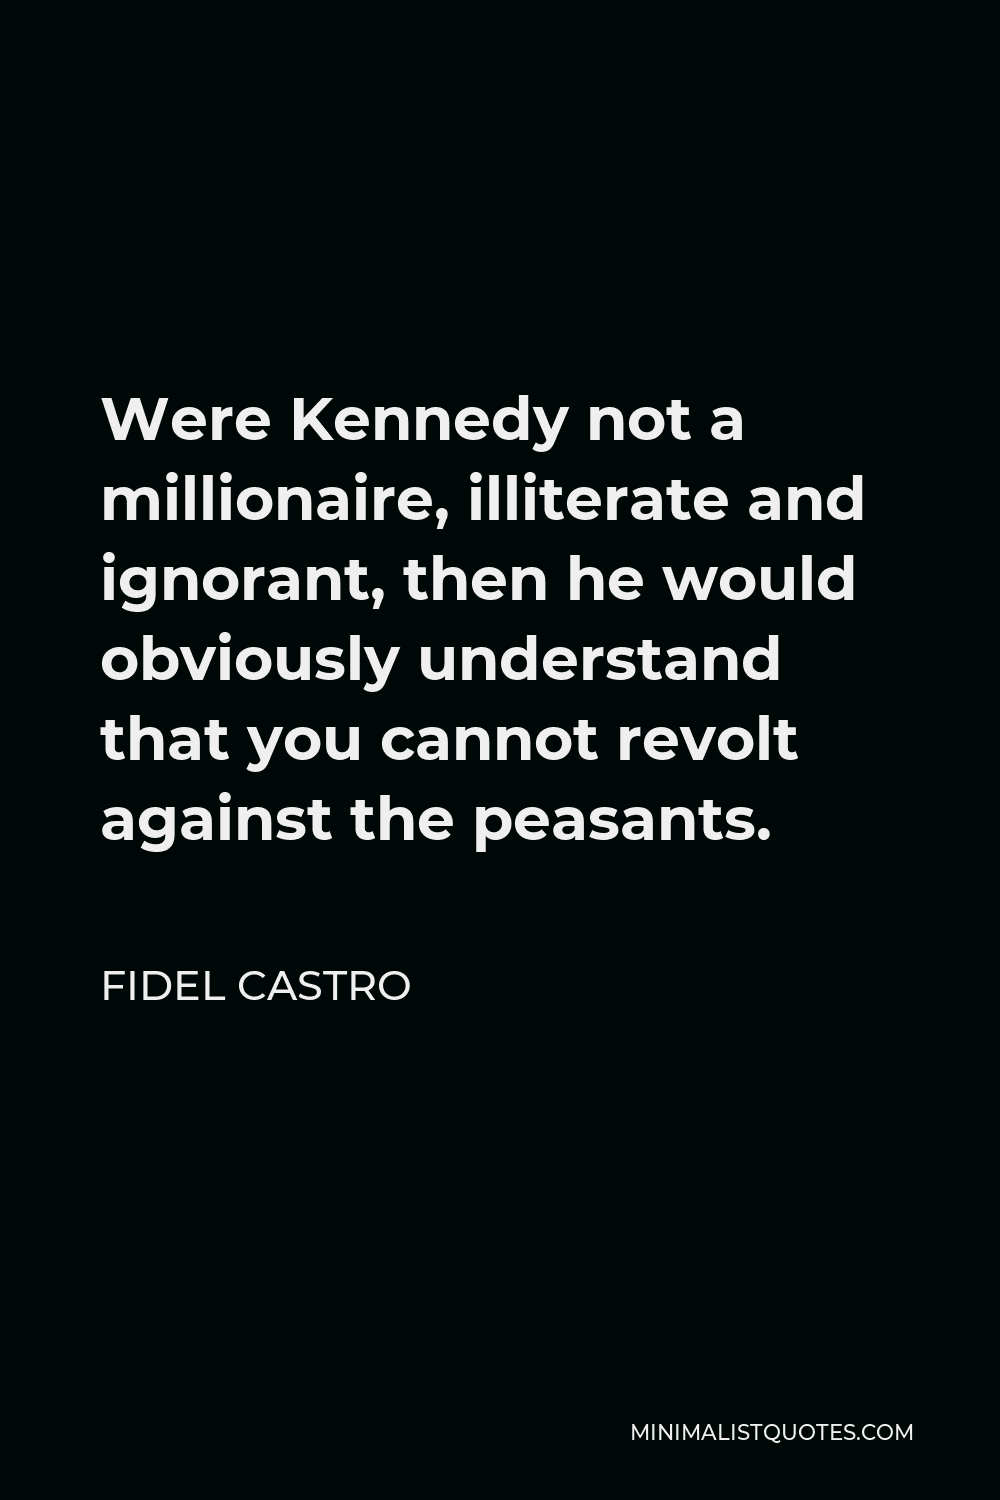 Fidel Castro Quote - Were Kennedy not a millionaire, illiterate and ignorant, then he would obviously understand that you cannot revolt against the peasants.